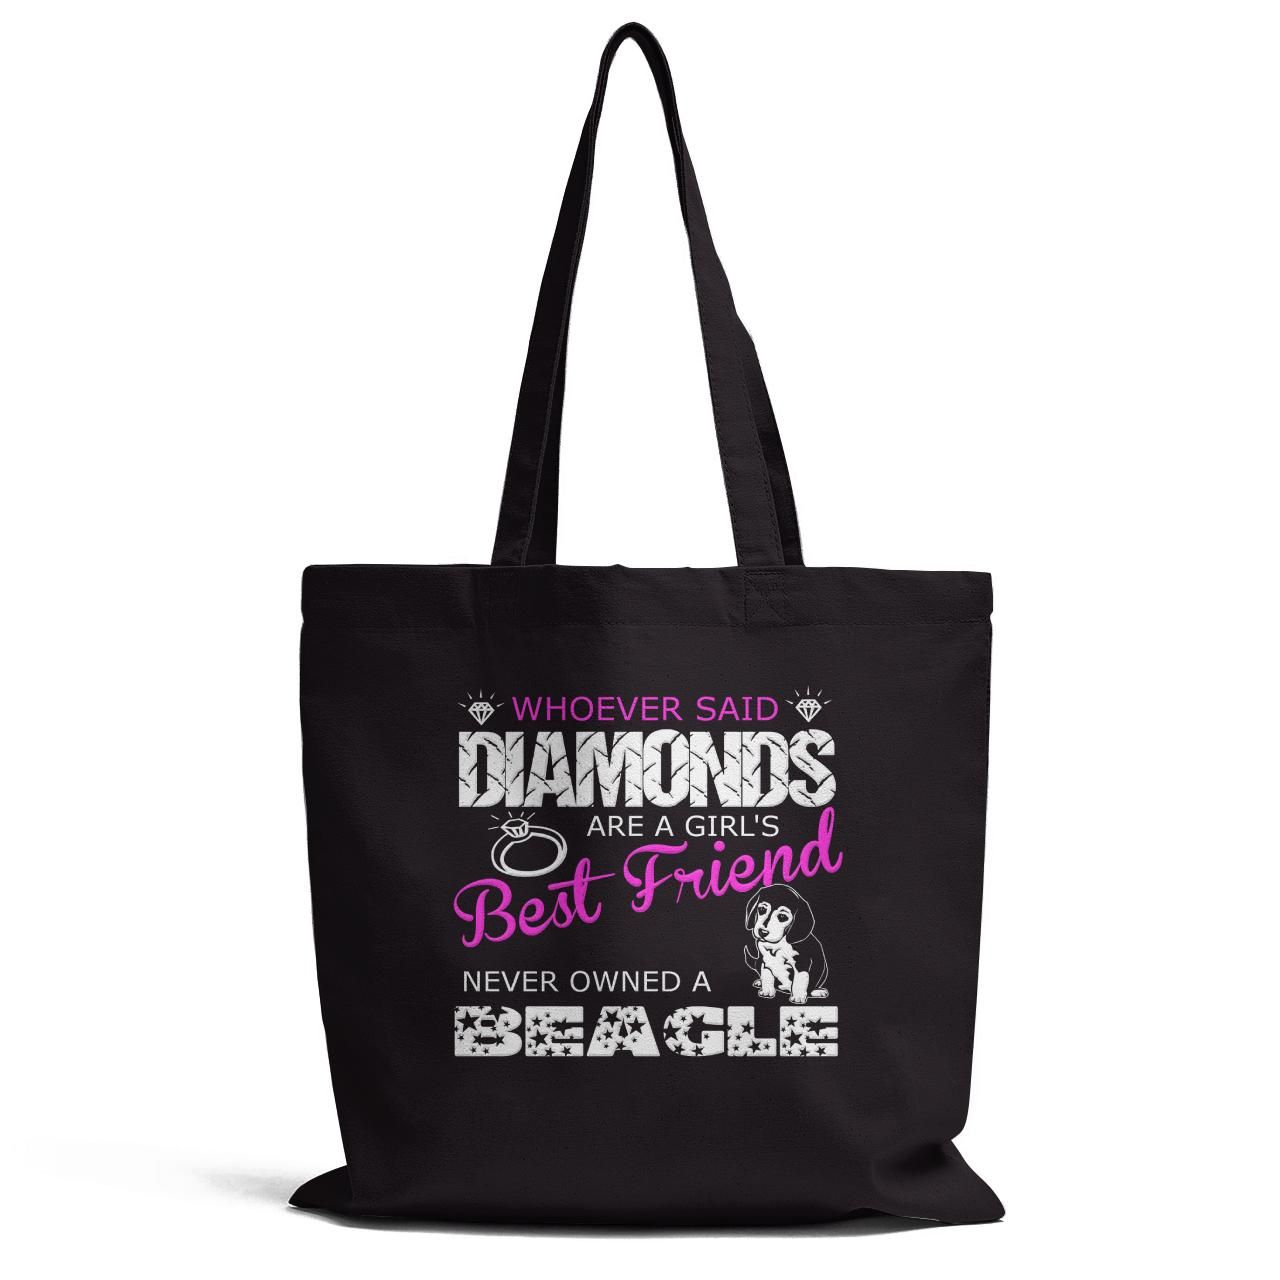 Best Friend Never Owned A Beagle Tote Bag